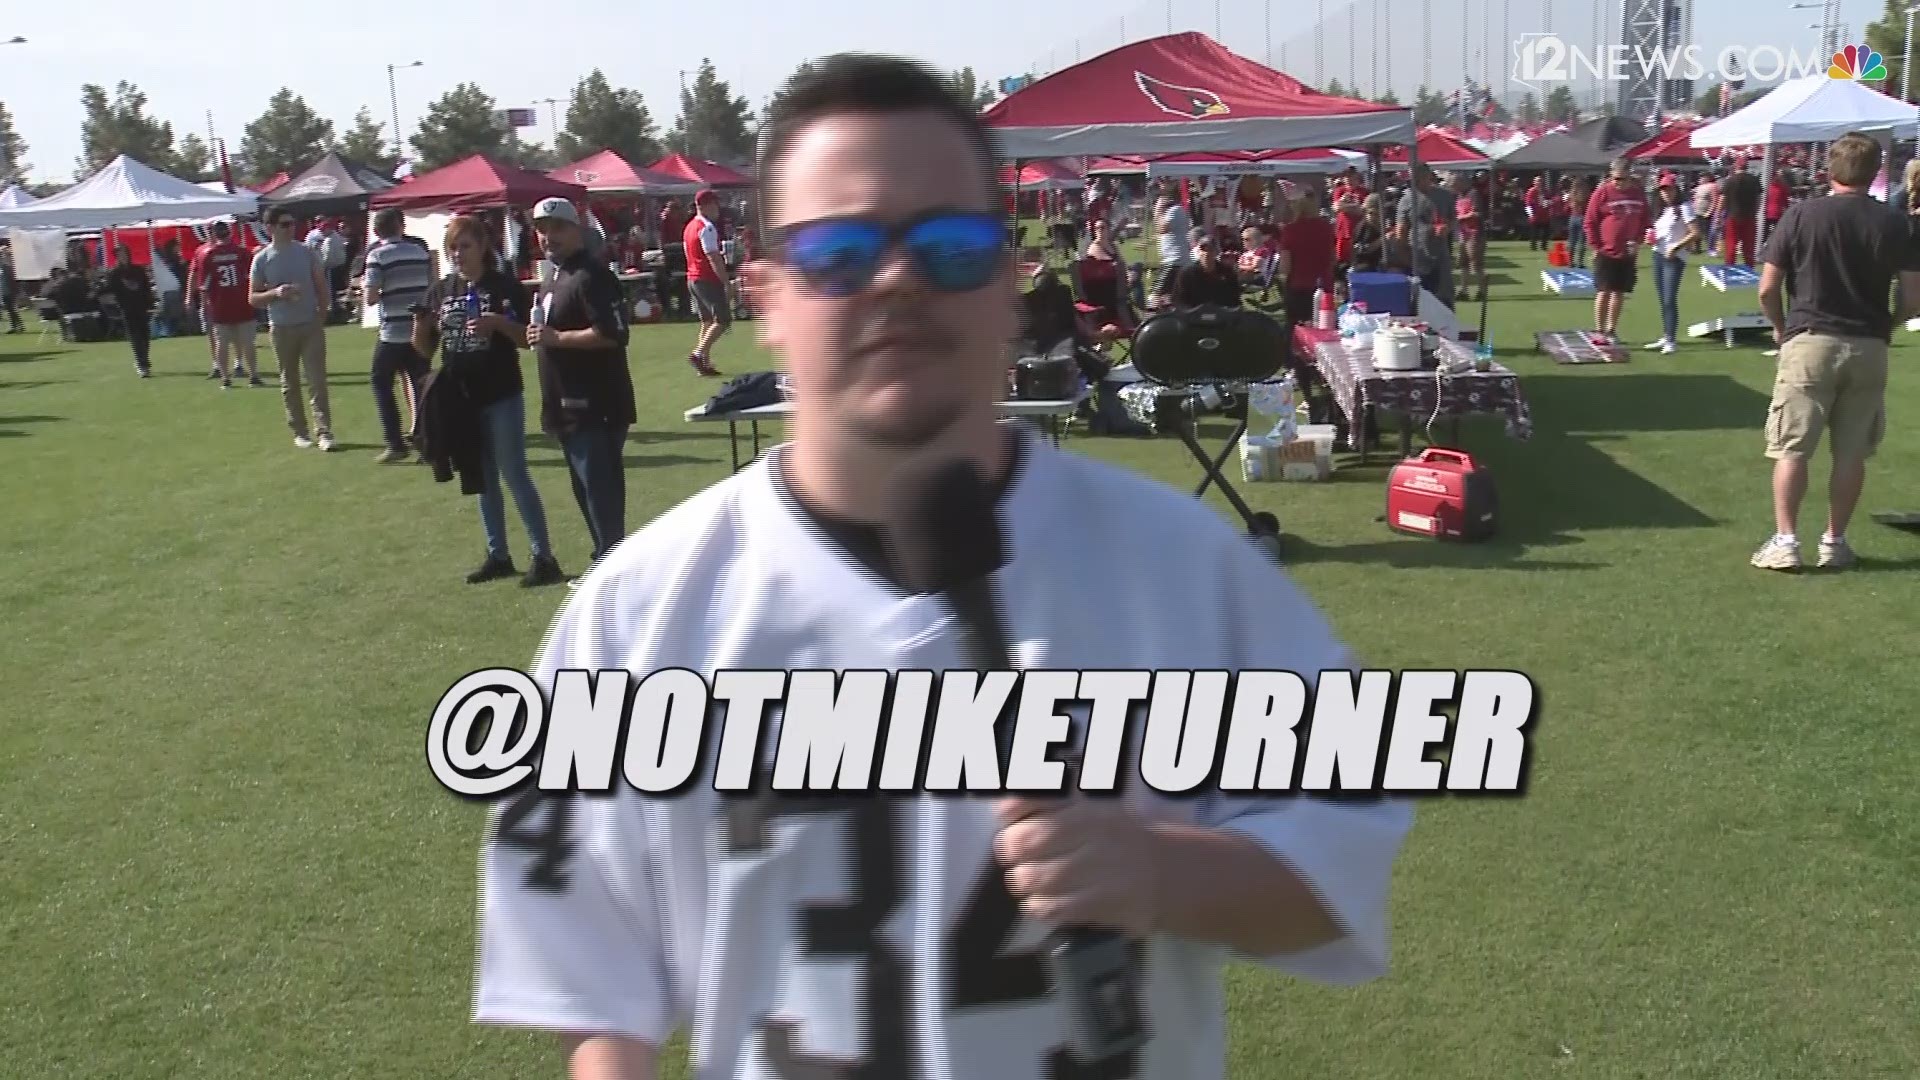 The Black Hole was in full effect at the Raiders vs Cardinals game, and Comedian Mike Turner took to the great lawn to see how easy it is to troll Raiders fan.